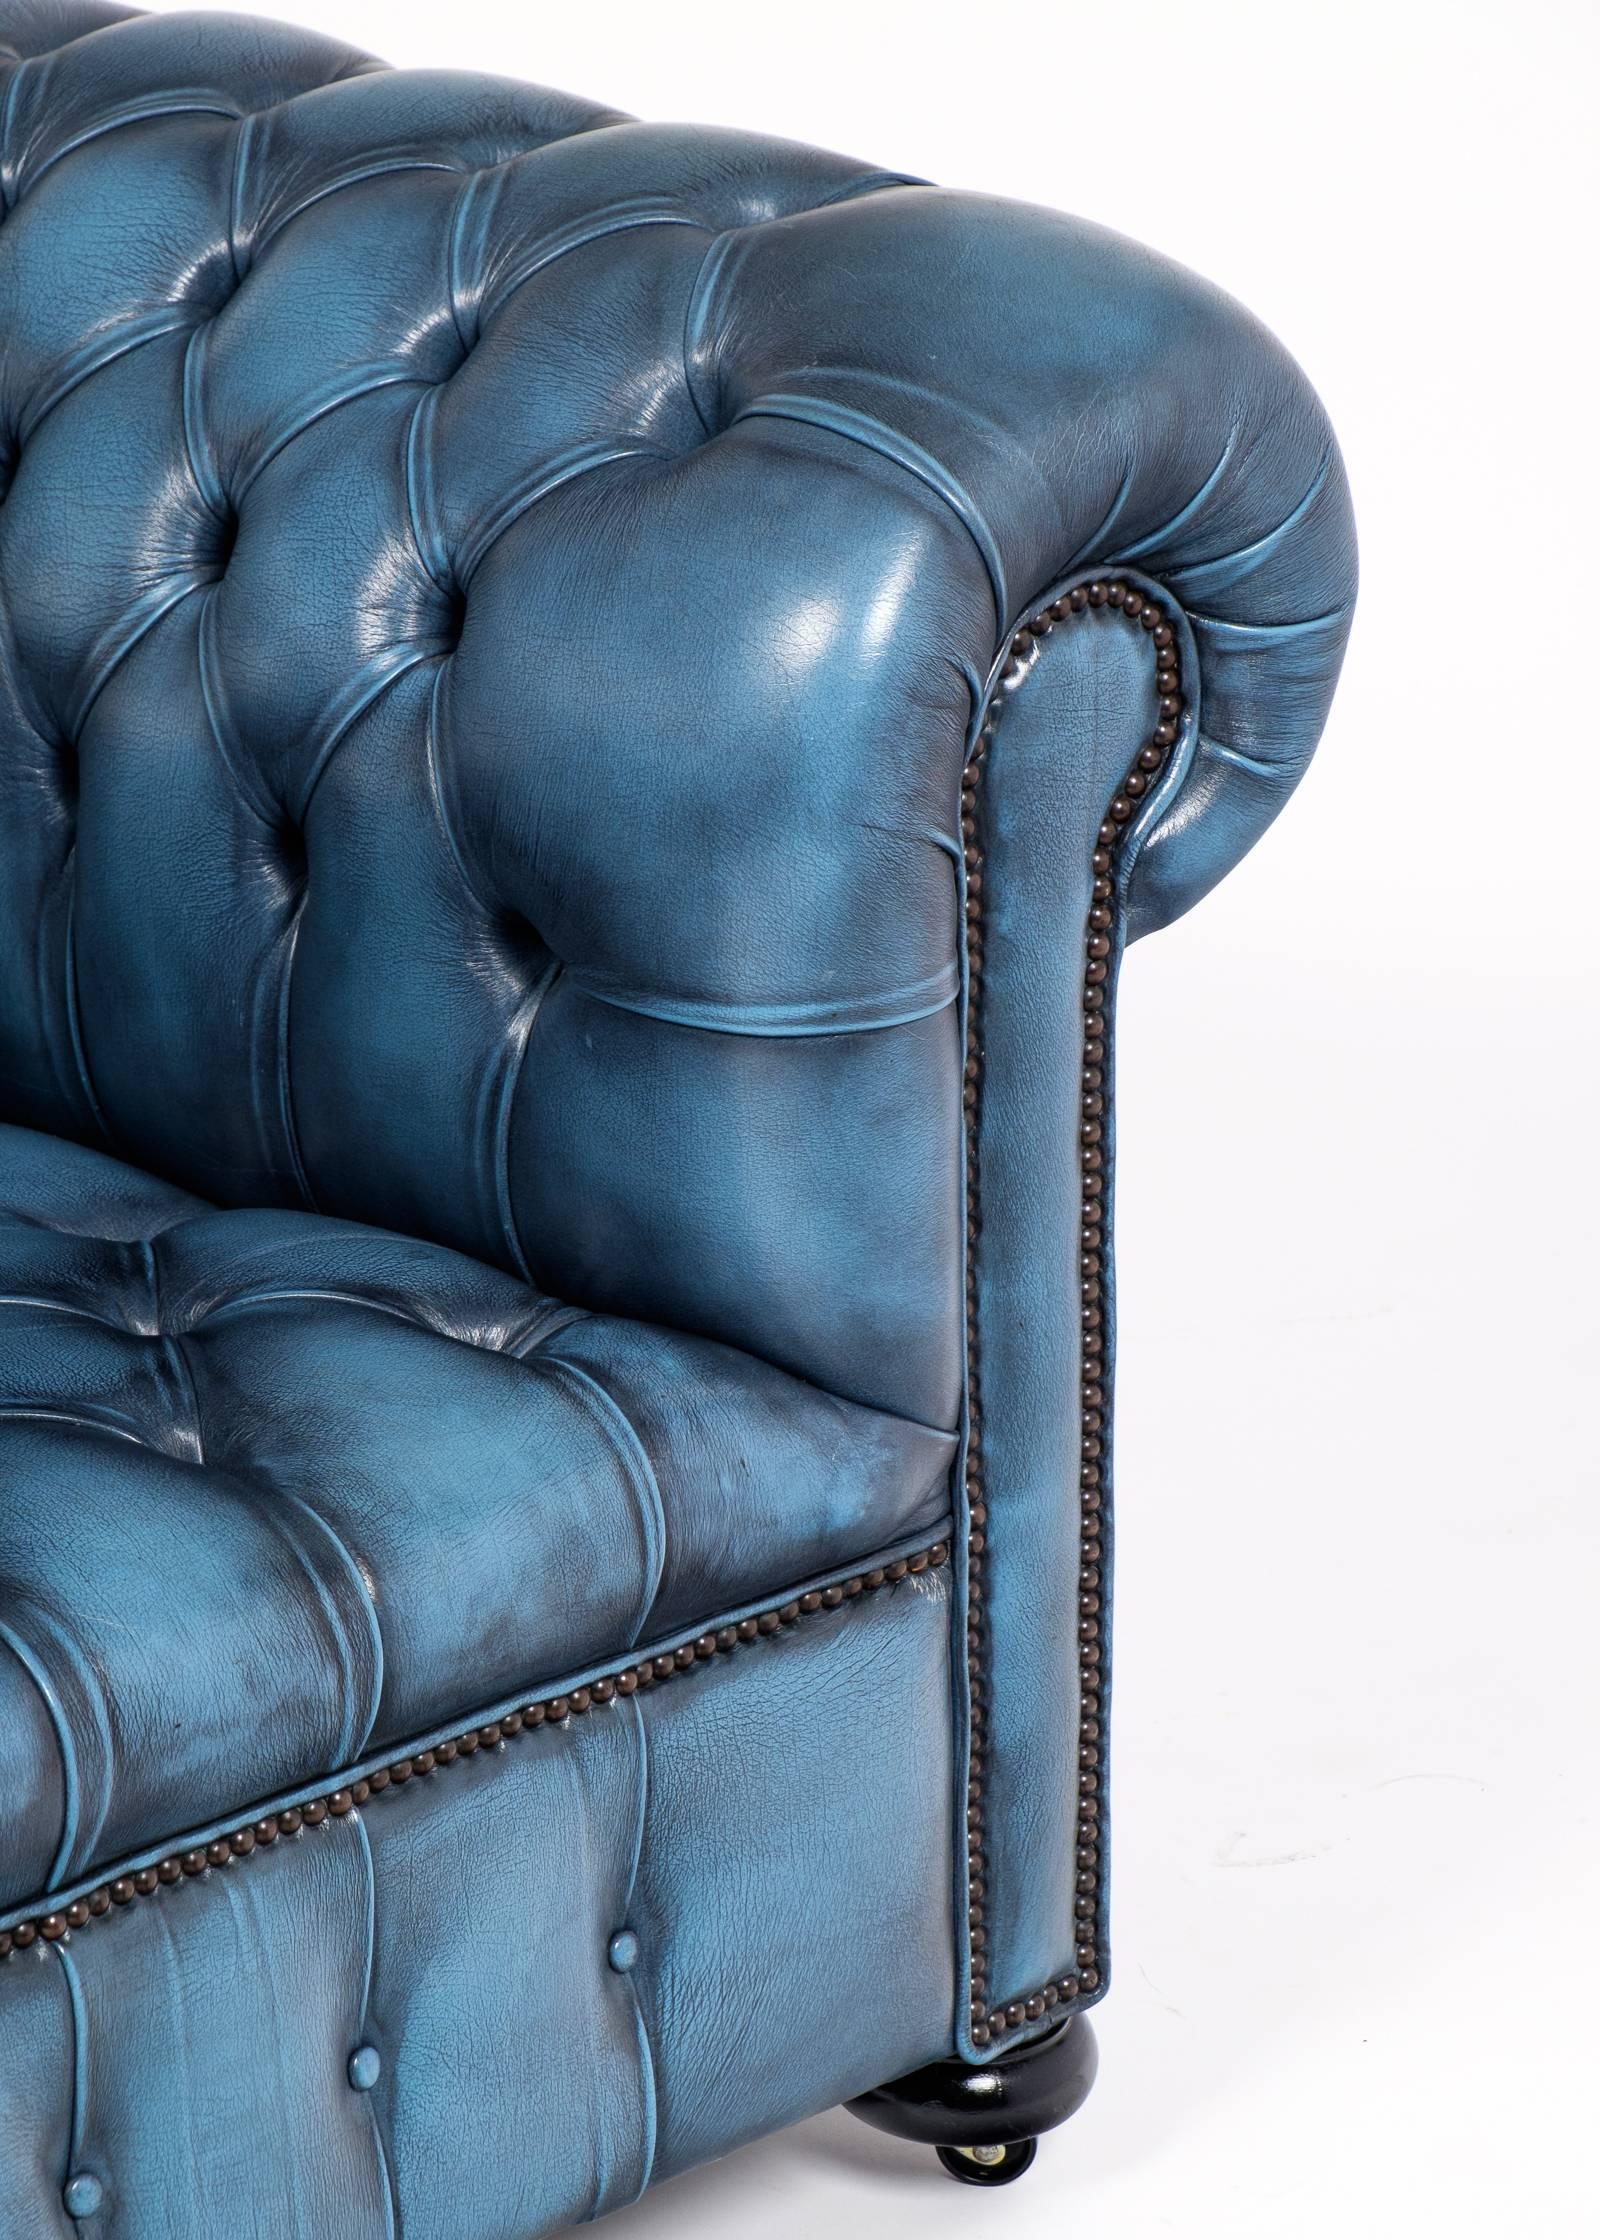 English Vintage Steel Blue Leather Chesterfield Club Chair